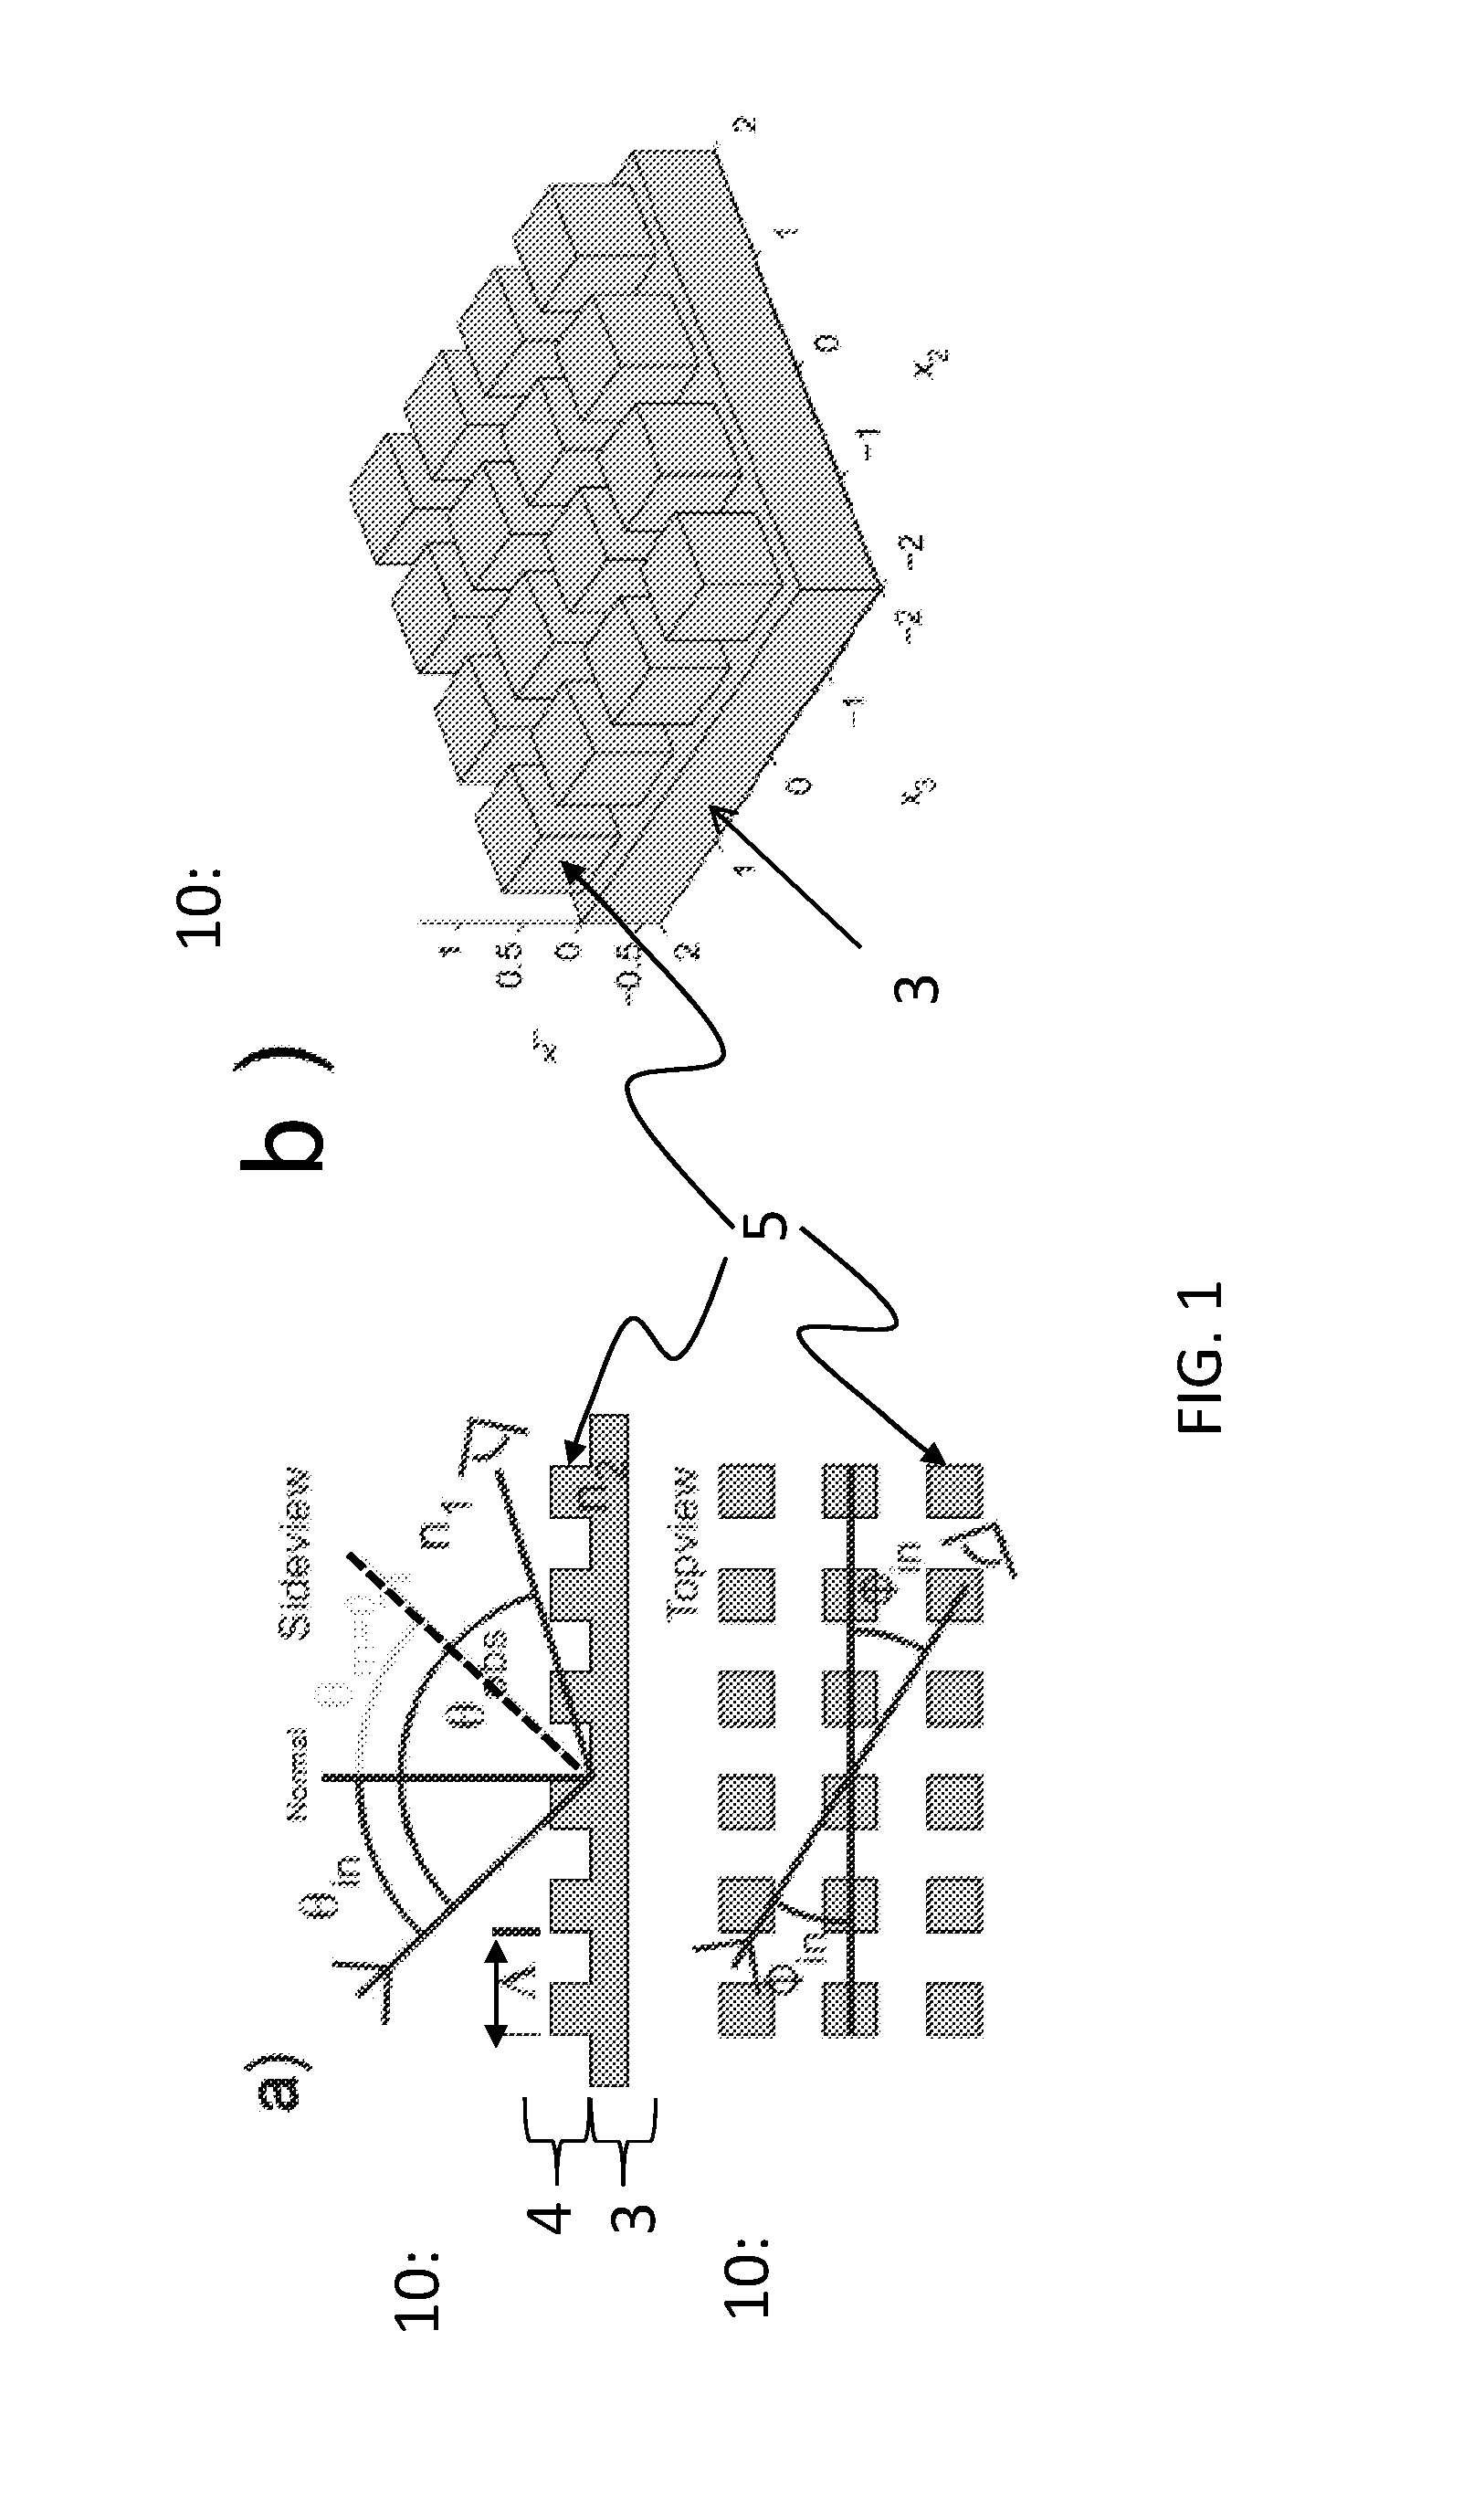 An optical device capable of providing a structural color, and a corresponding method of manufacturing such a device